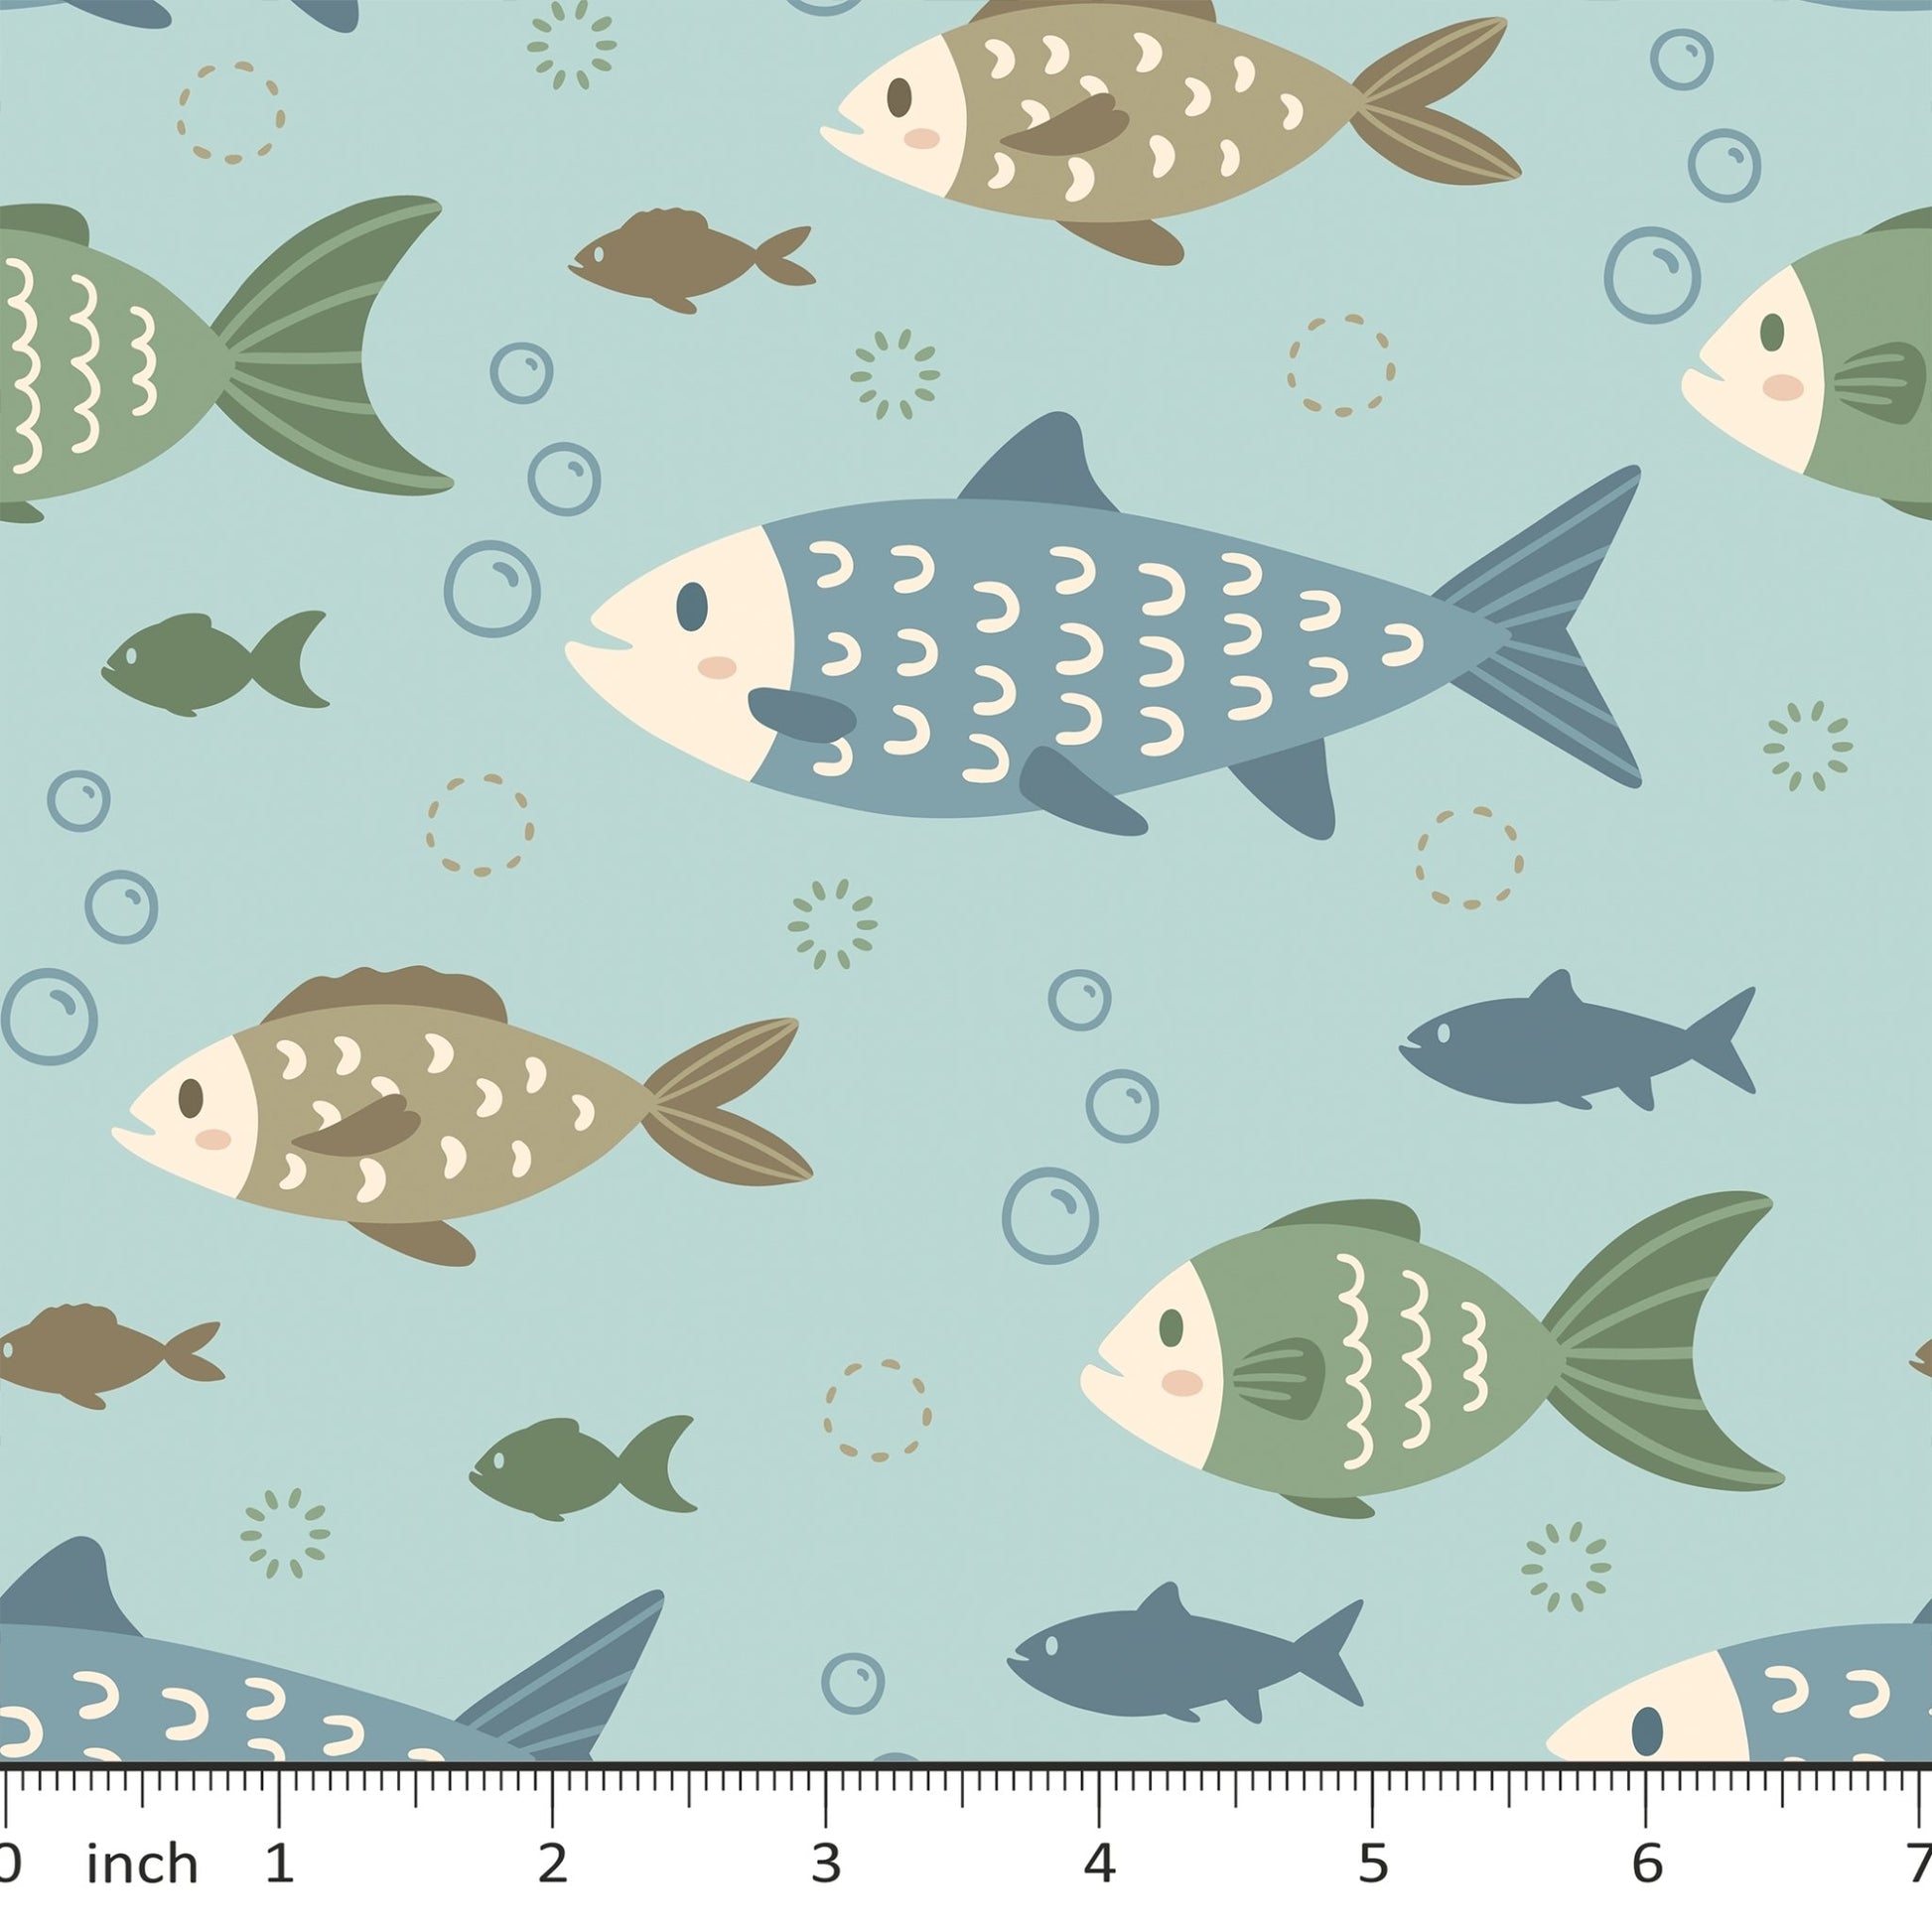 Cute Fish - MBM Creative - Cotton Lycra Jersey - By the 1/2 Yard - Little Rhody Sewing Co.